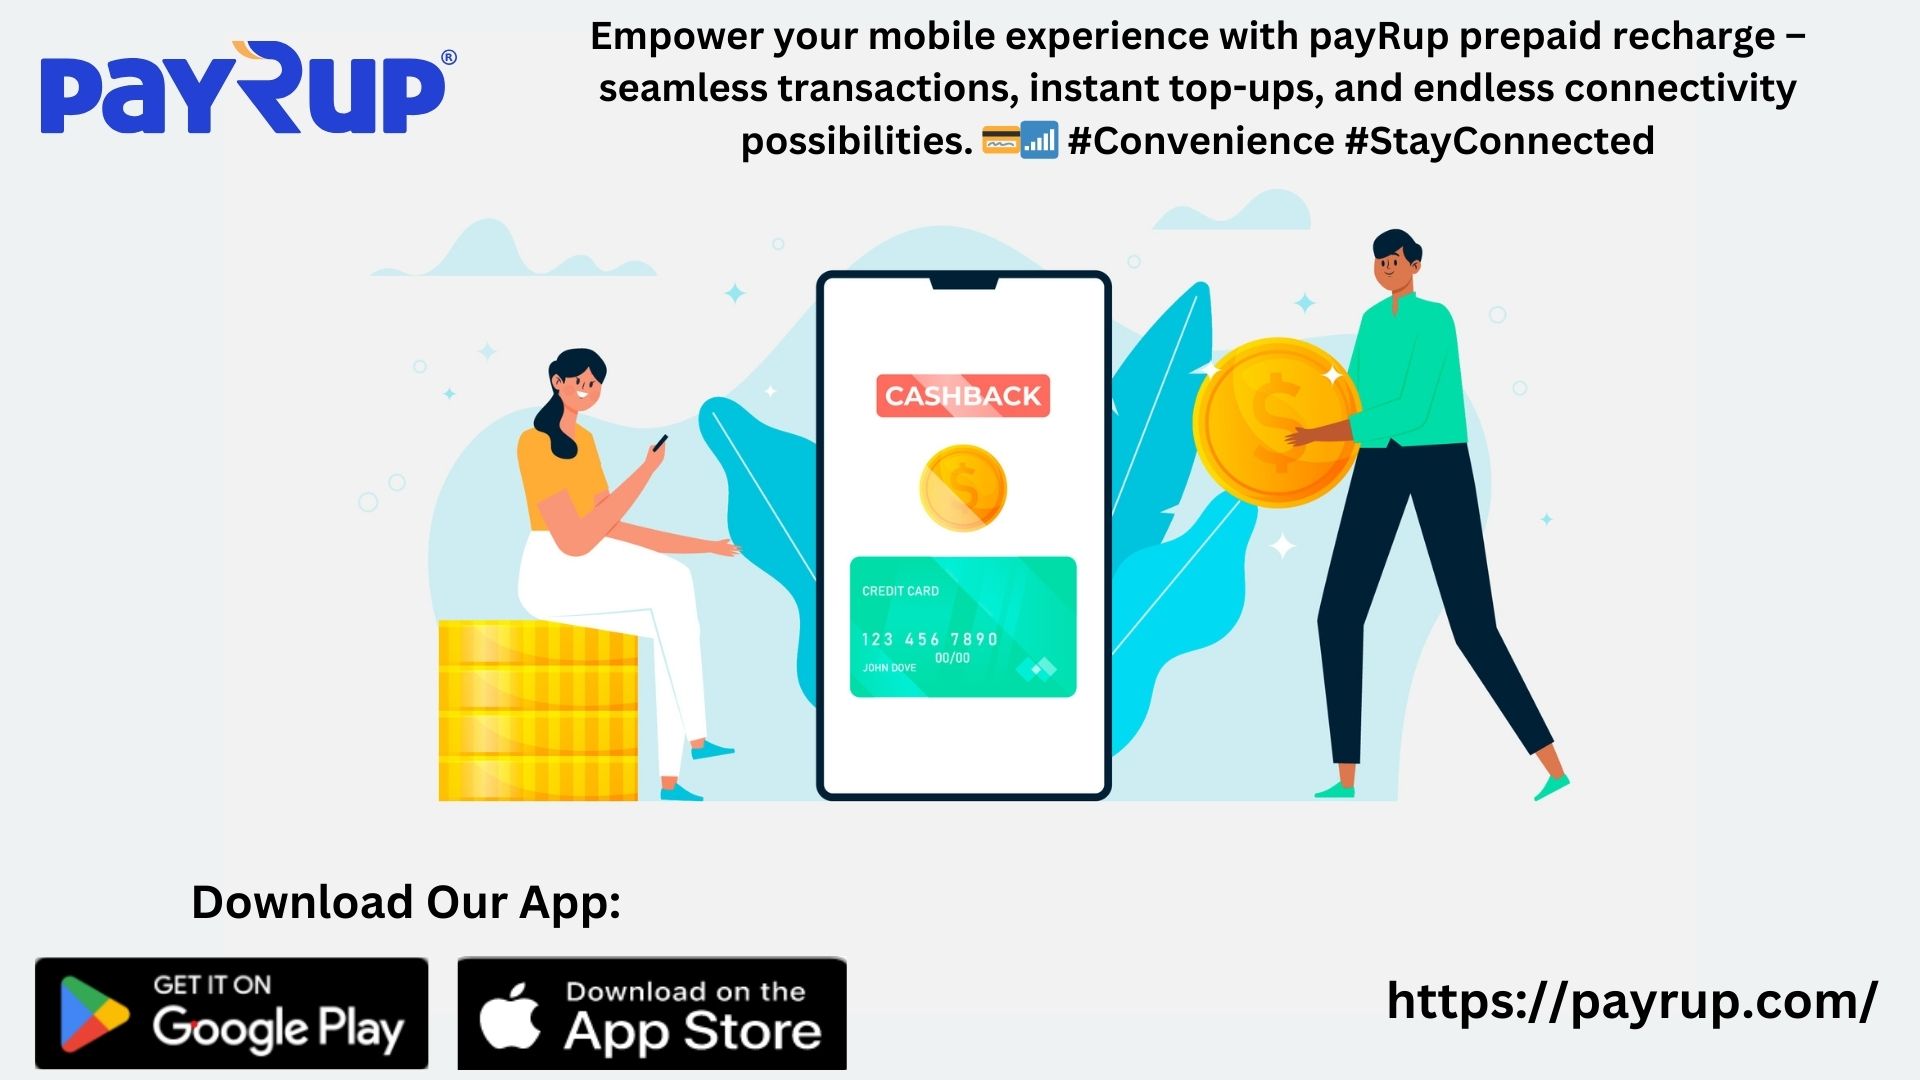 Experience the Ease of payRup Prepaid Recharge